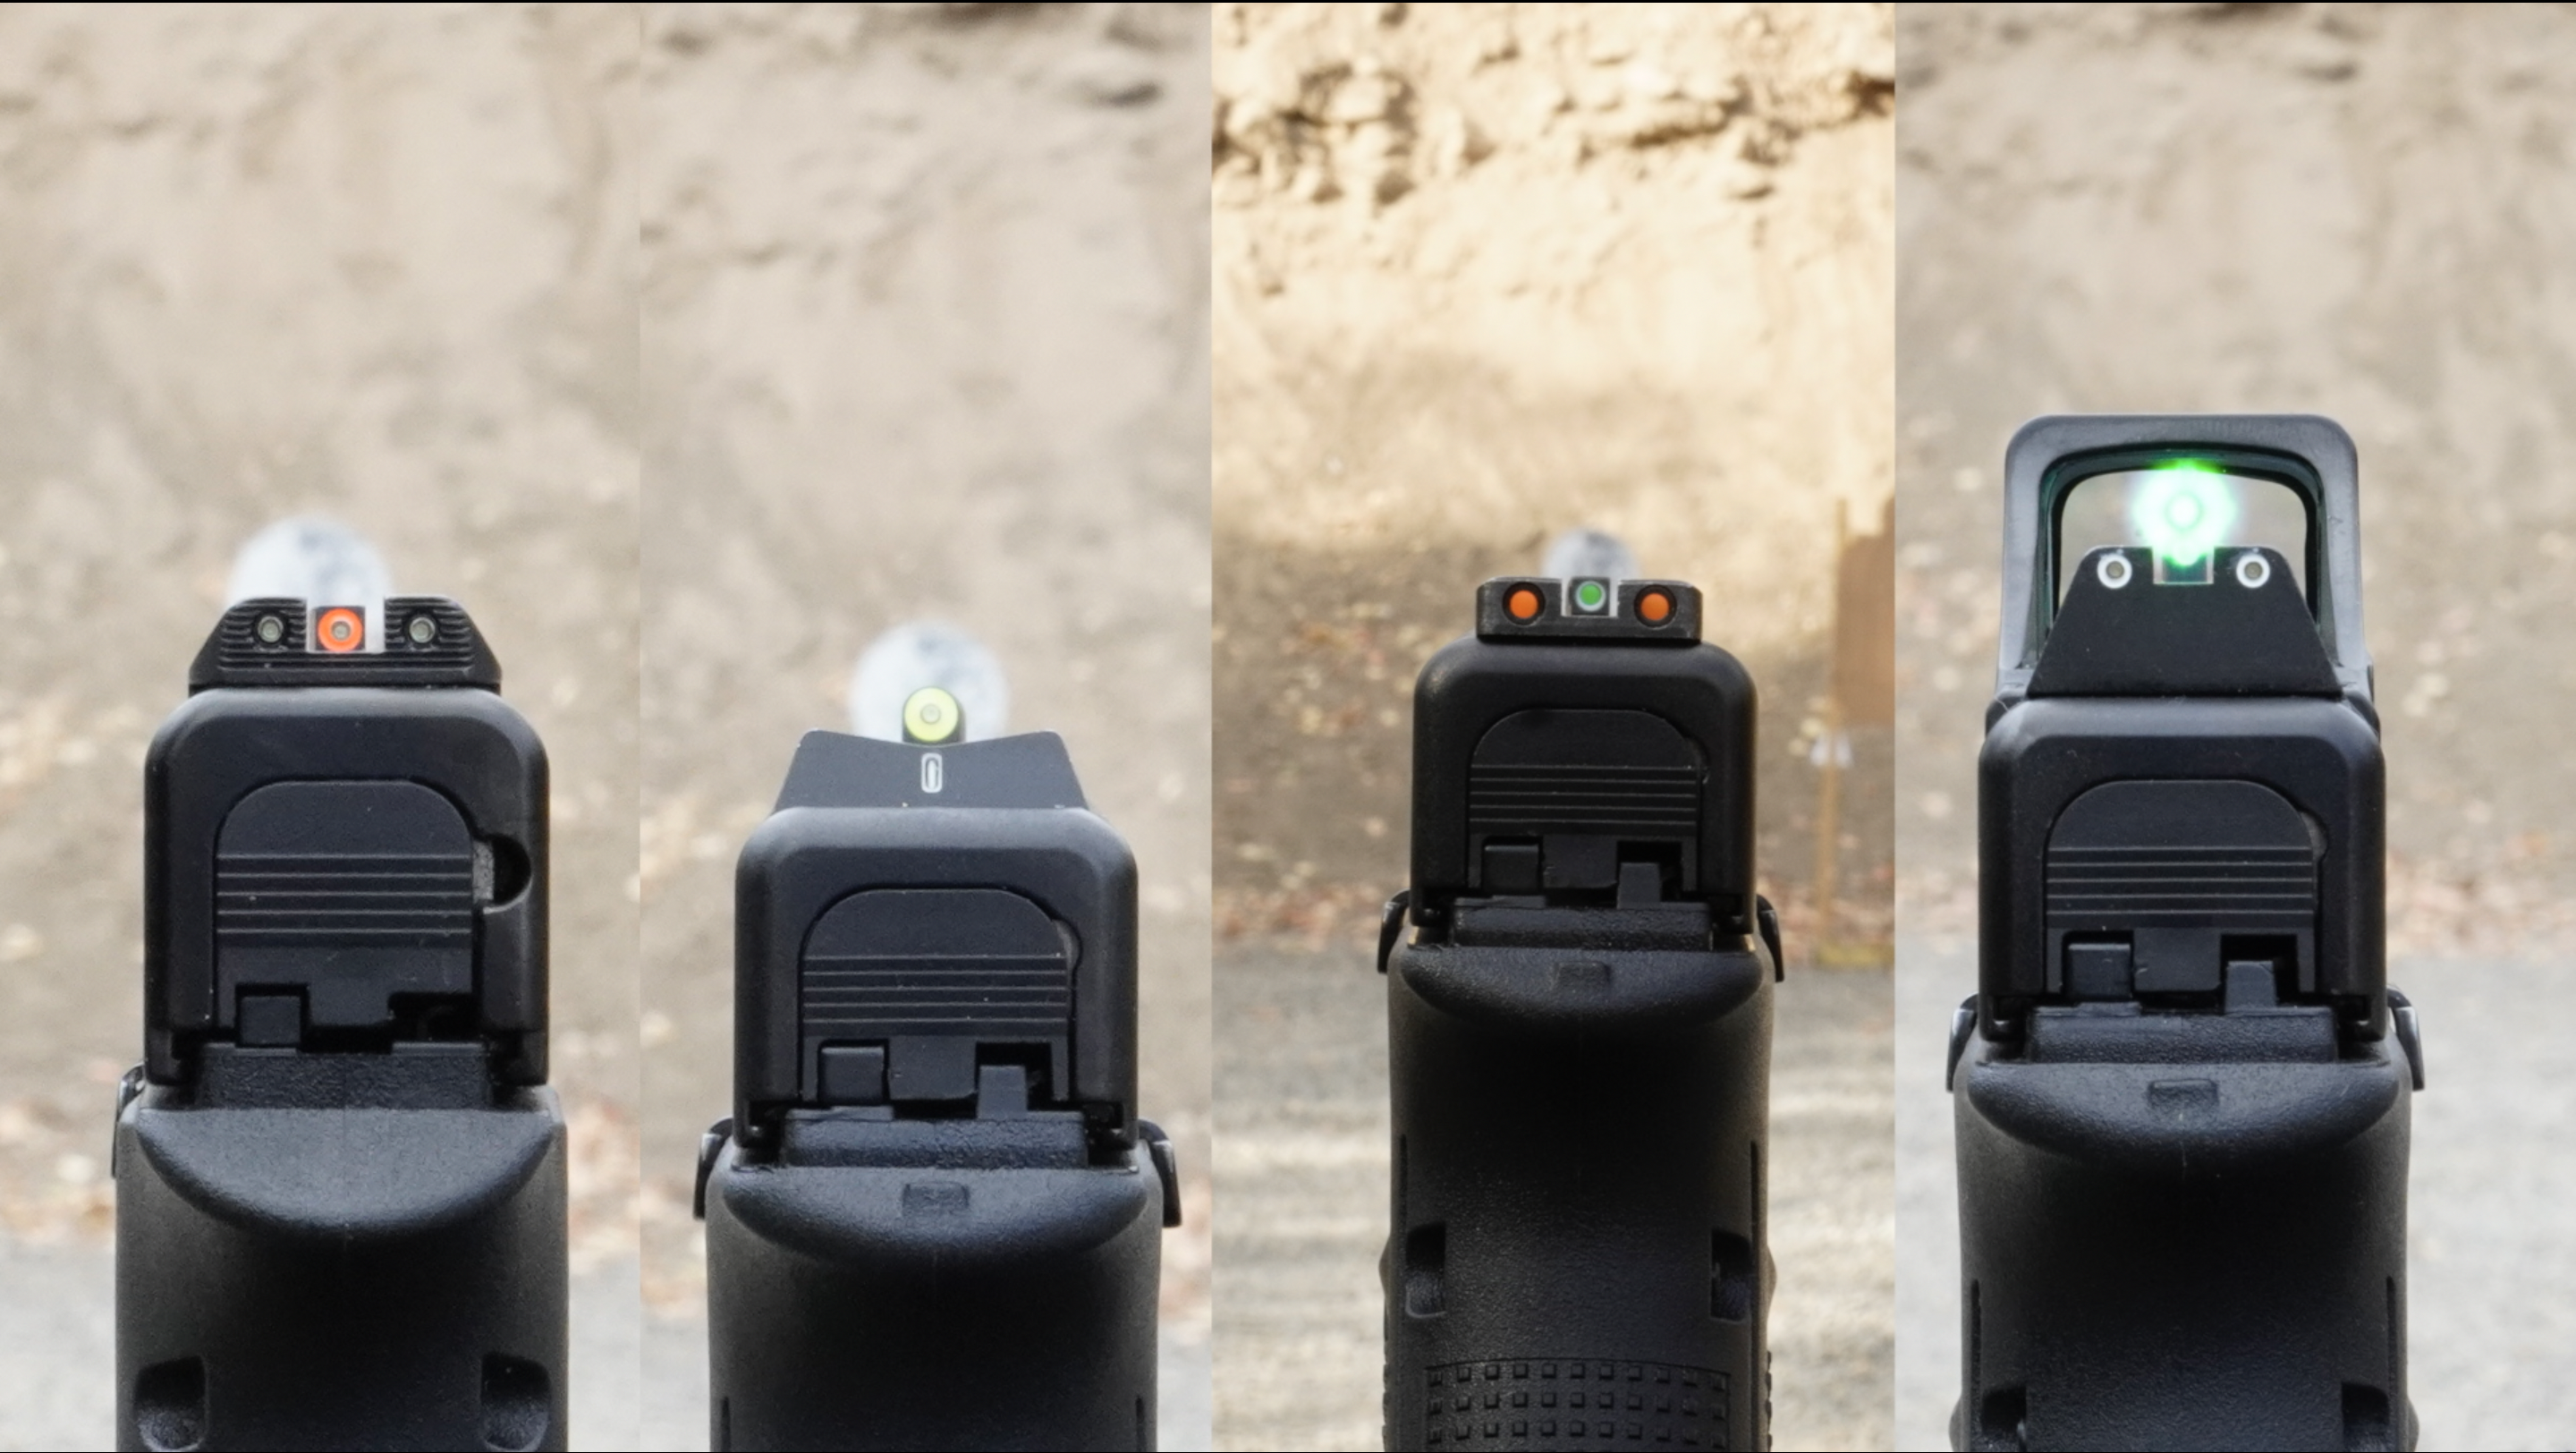 The best glock sights compared.